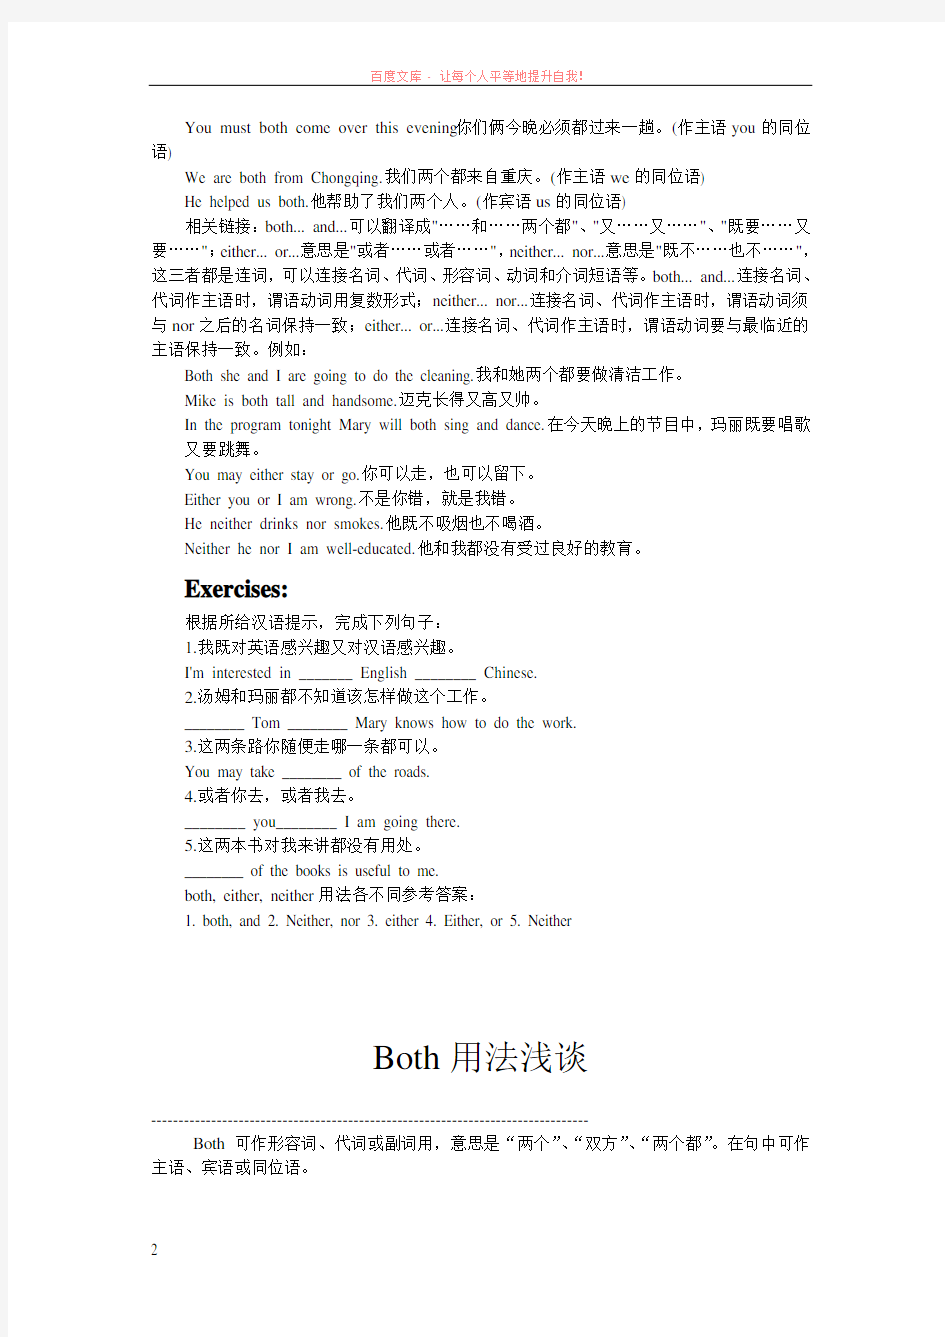 botheitherneither用法各不同 (1)